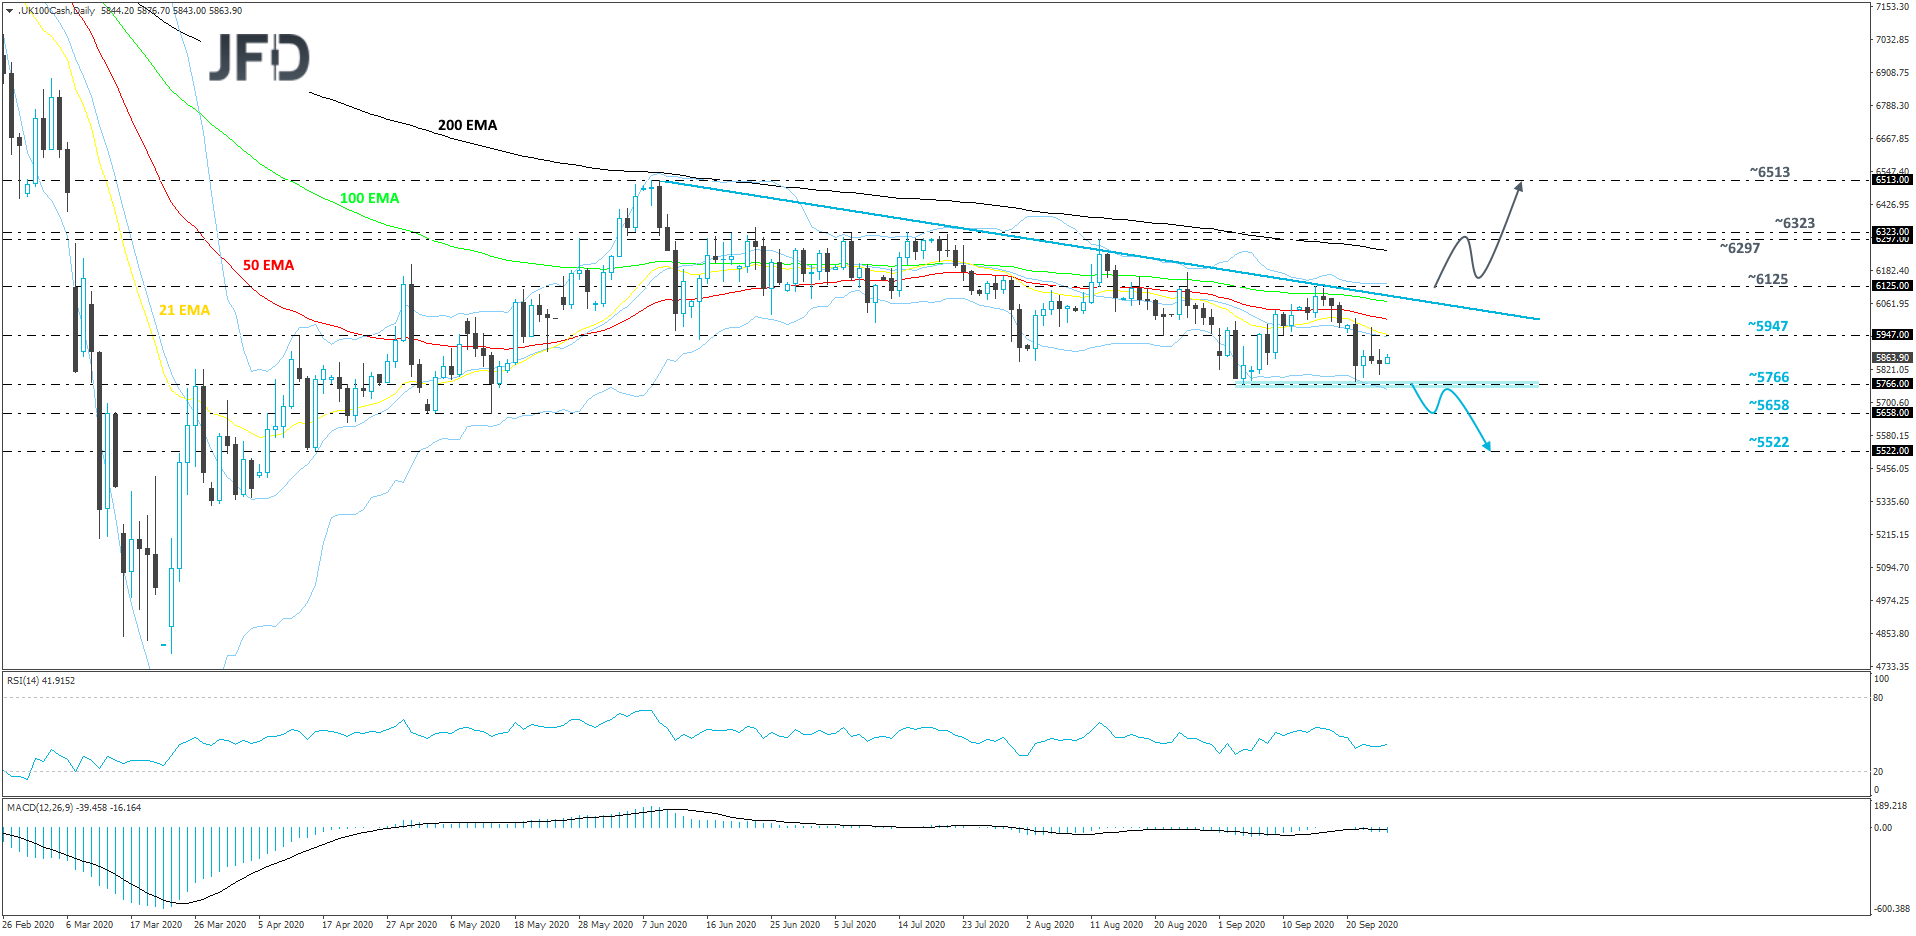 FTSE 100 cash index daily chart technical analysis